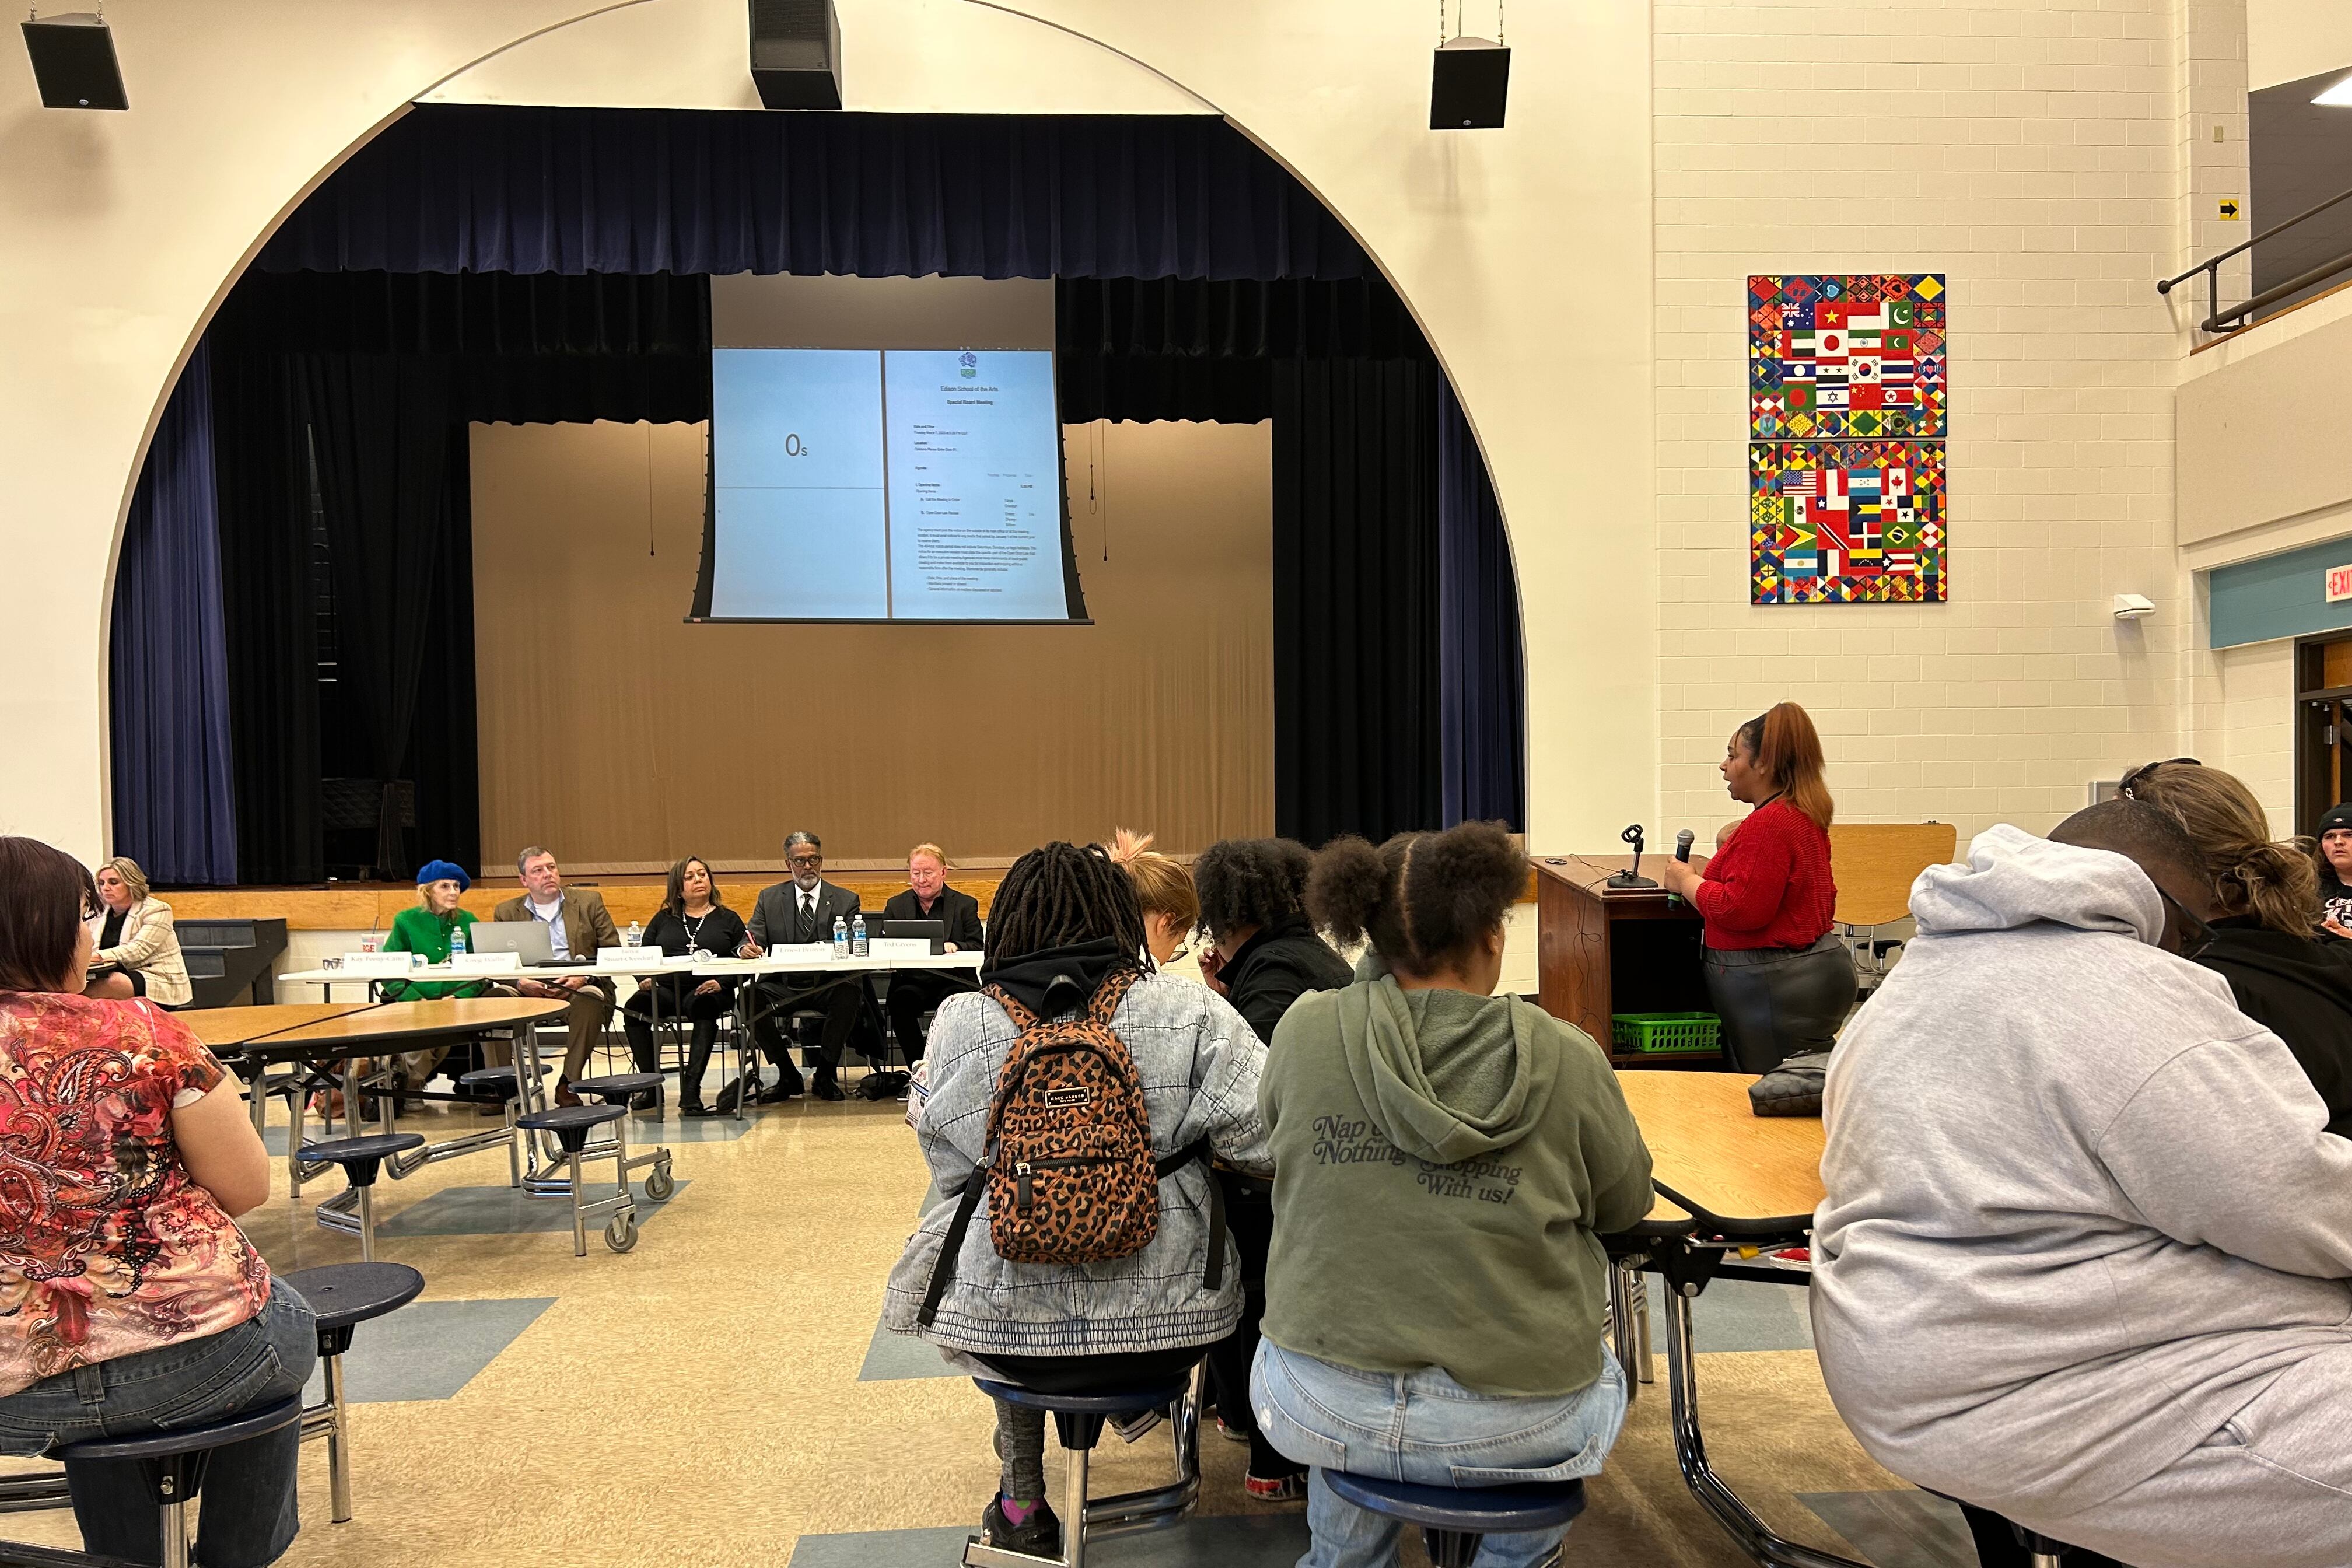 A woman in a red shirt at a podium addresses a row of people sitting behind a table in a school cafeteria. In the foreground are other people sitting and listening to her comments.